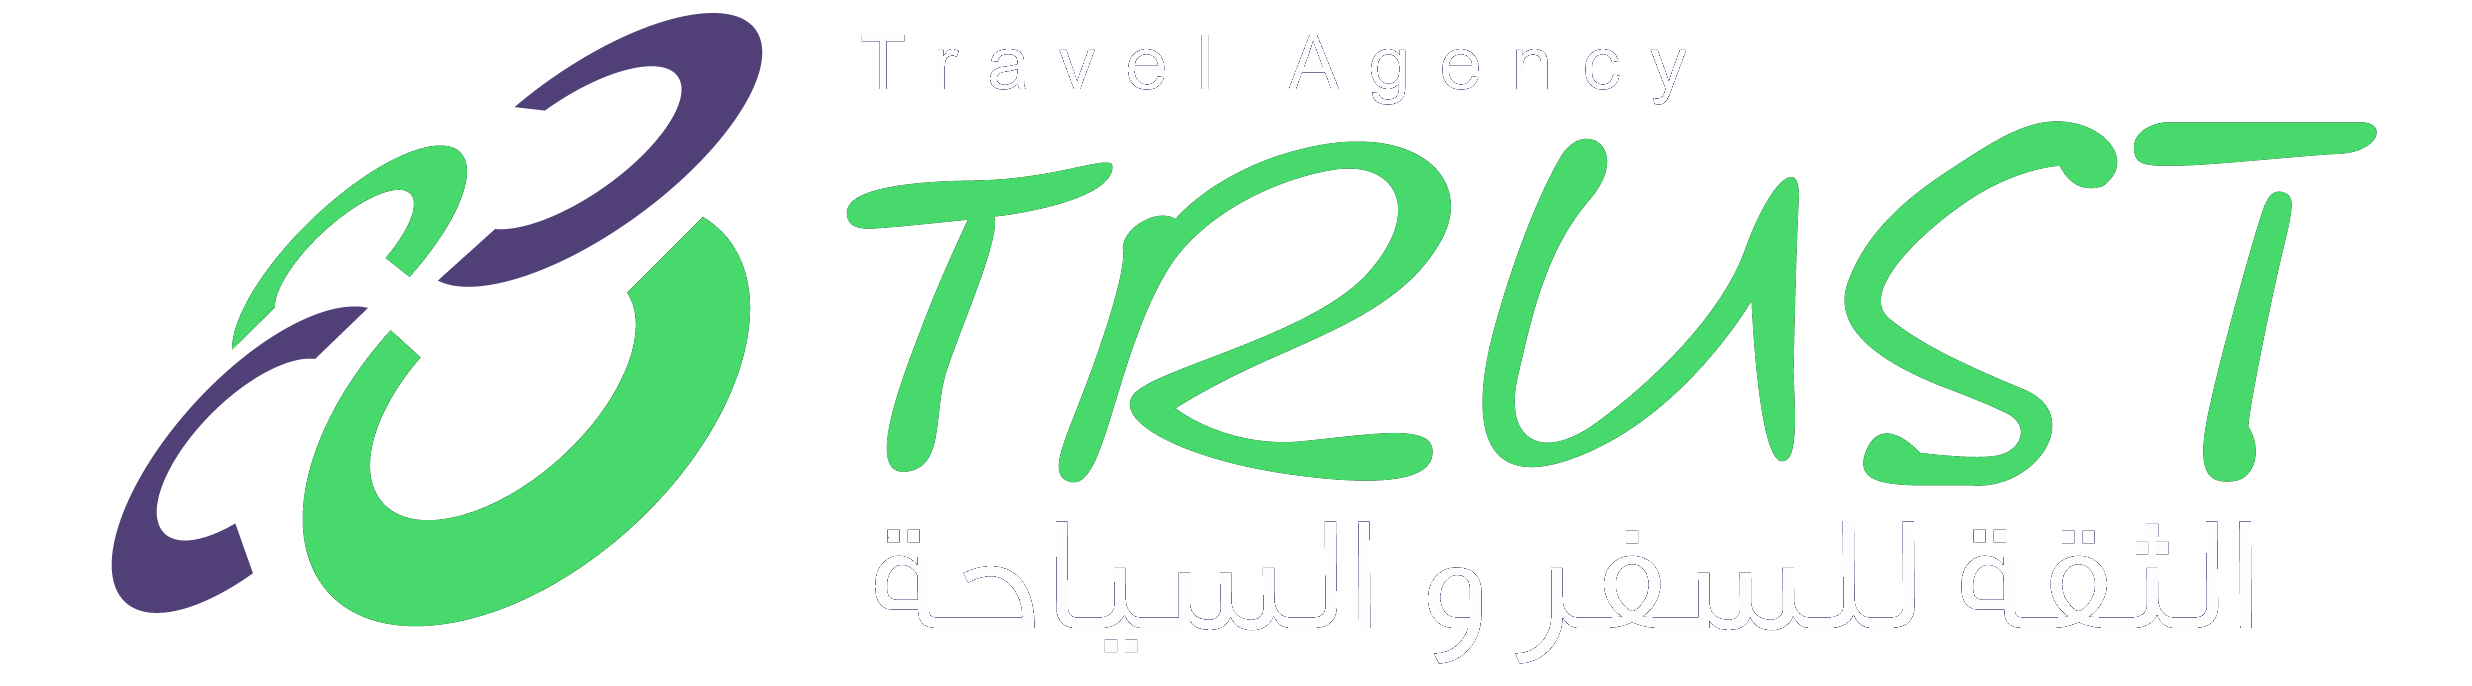 Trust Travel and Tourism Agency